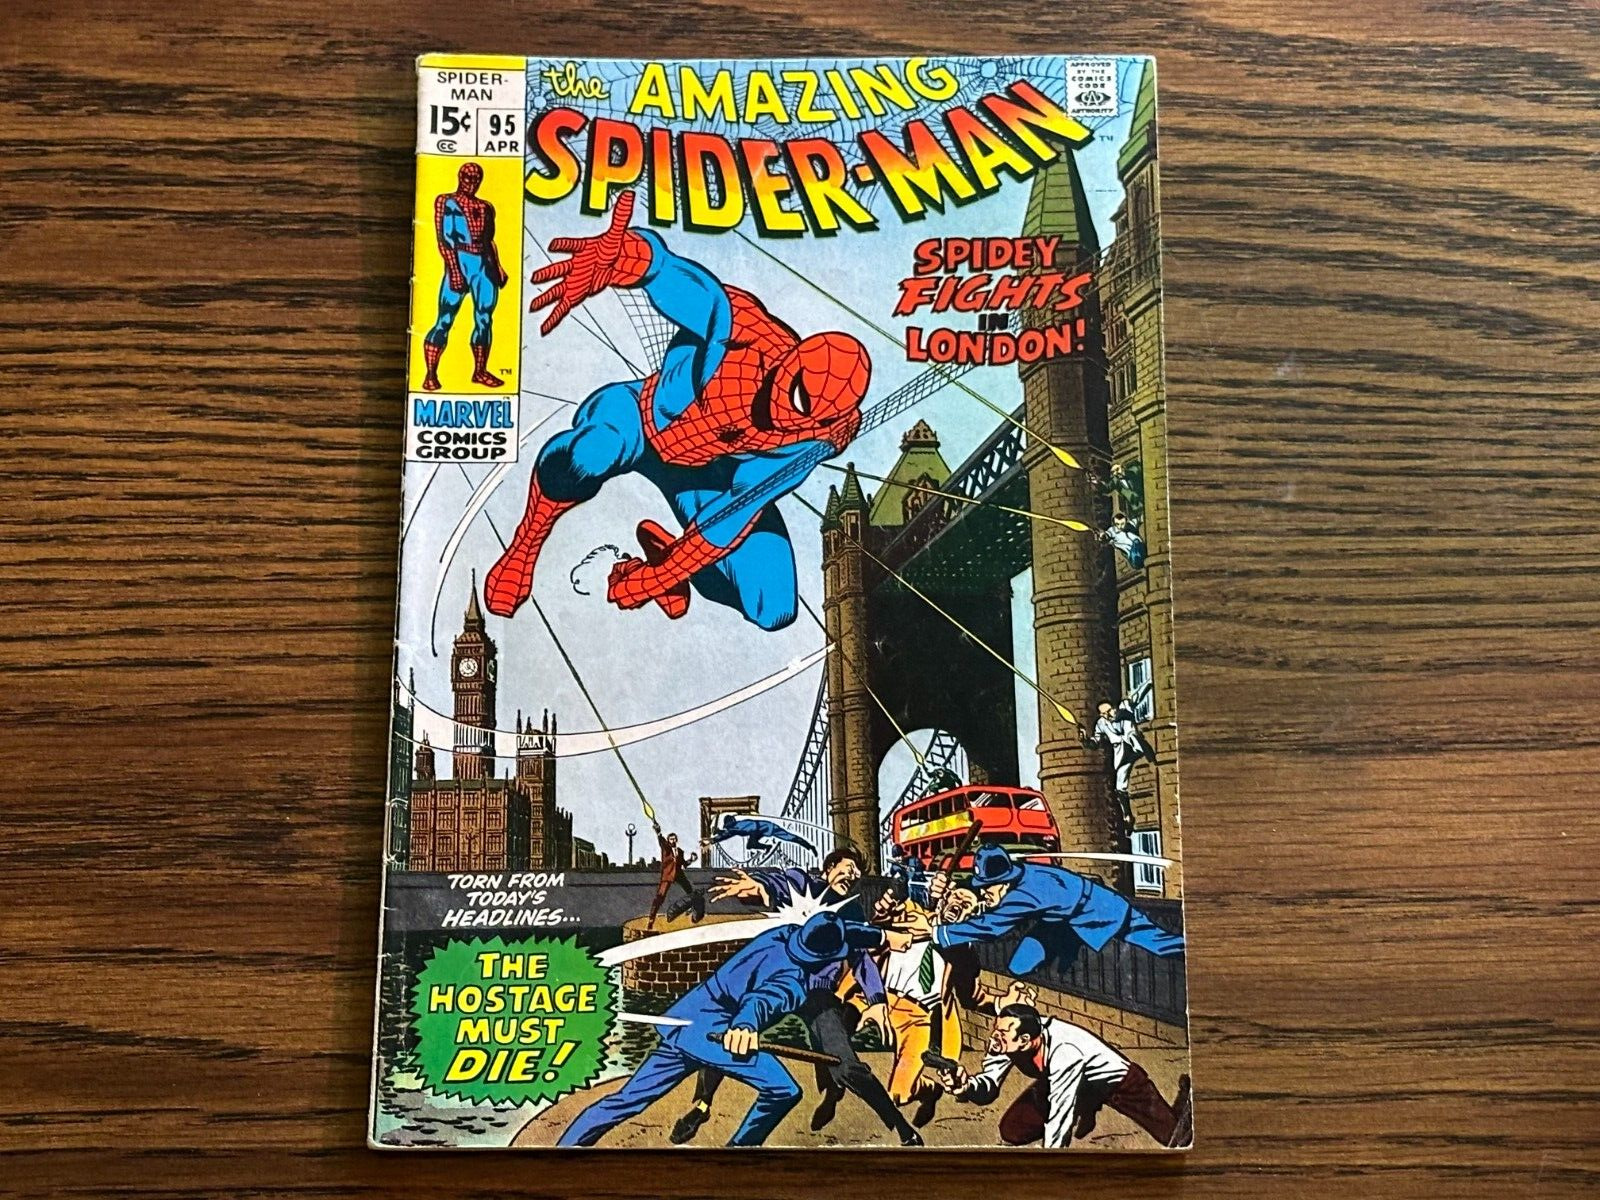 The AMAZING SPIDER-MAN #95 (1971) Marvel Comic Book Spider-Man in London